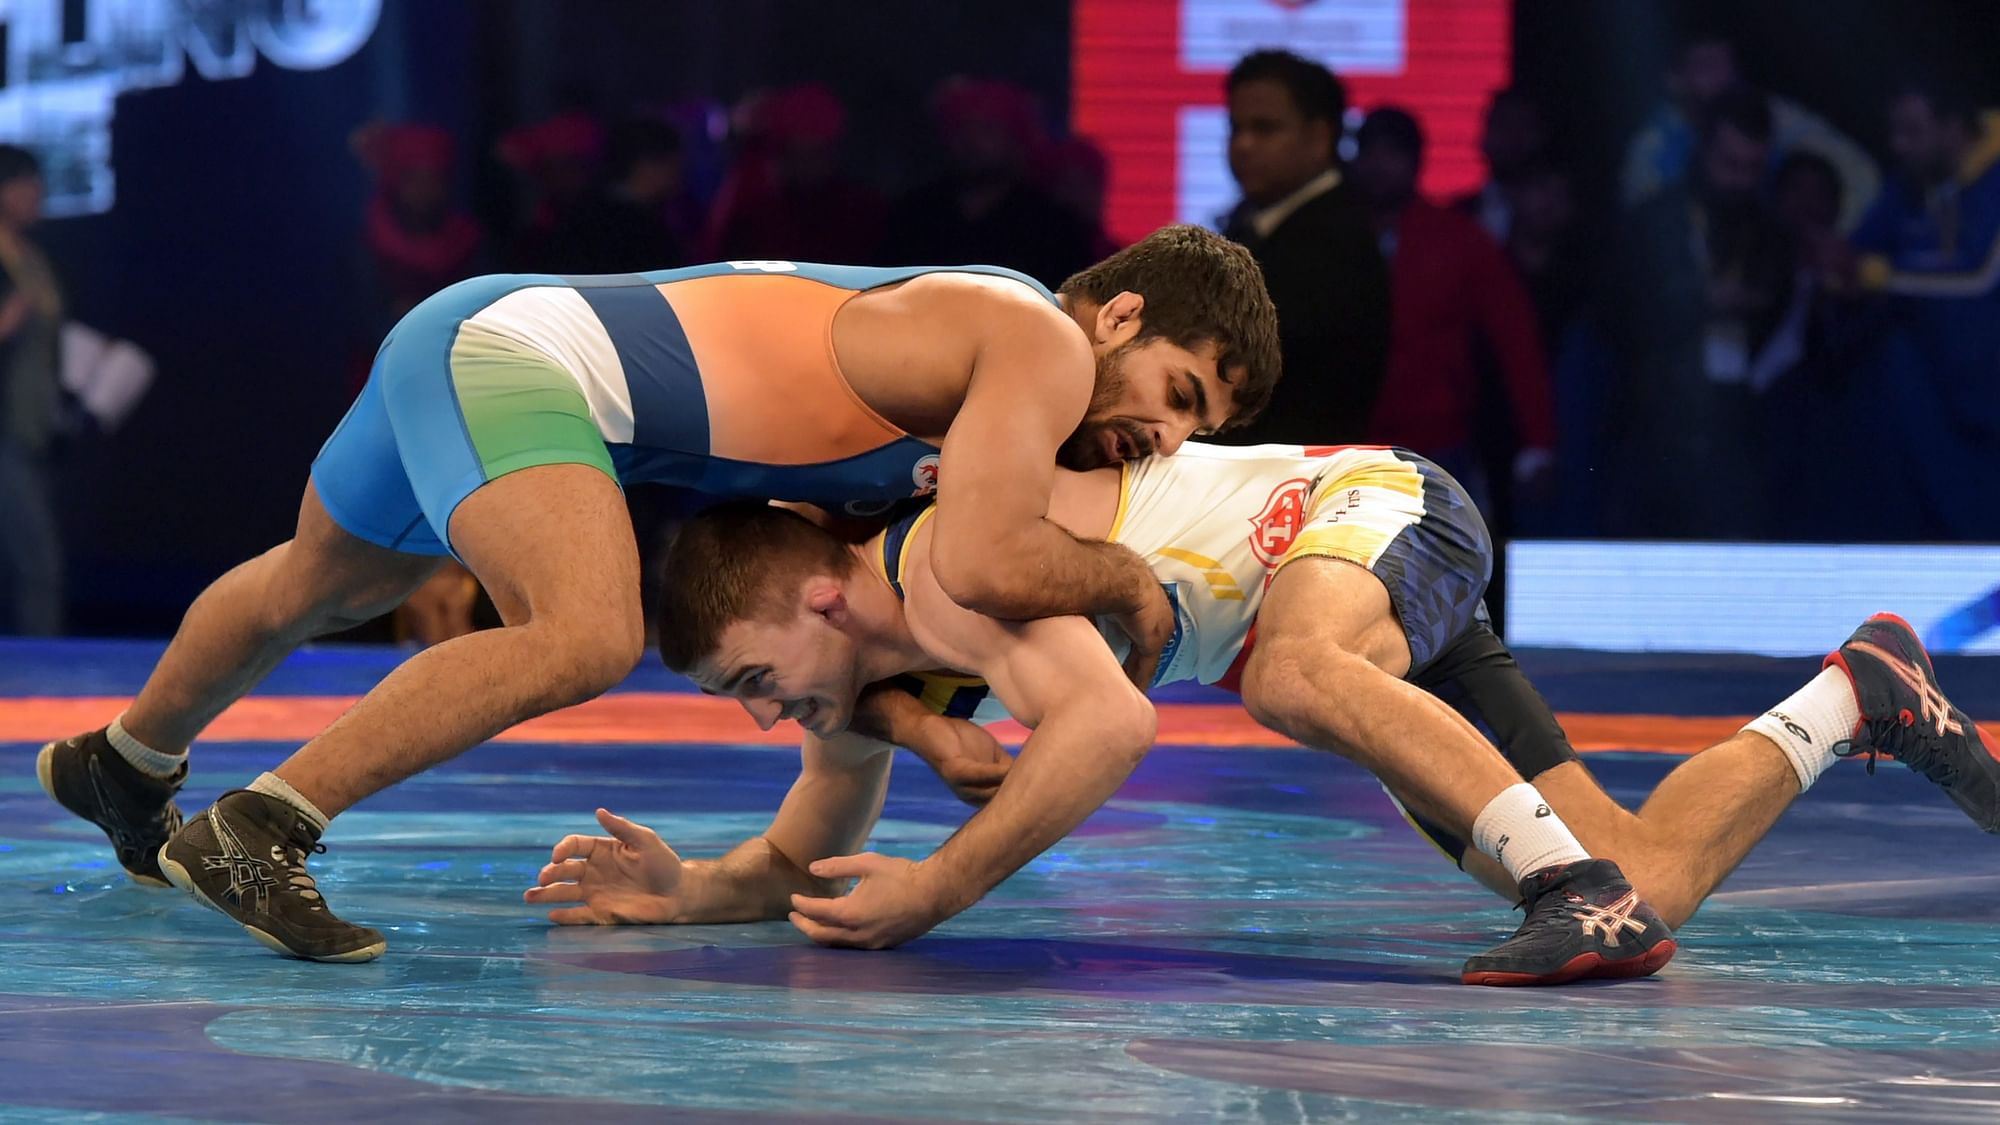 Over 20 Olympic and World Championship medallists will be taking part in PWL 2018.